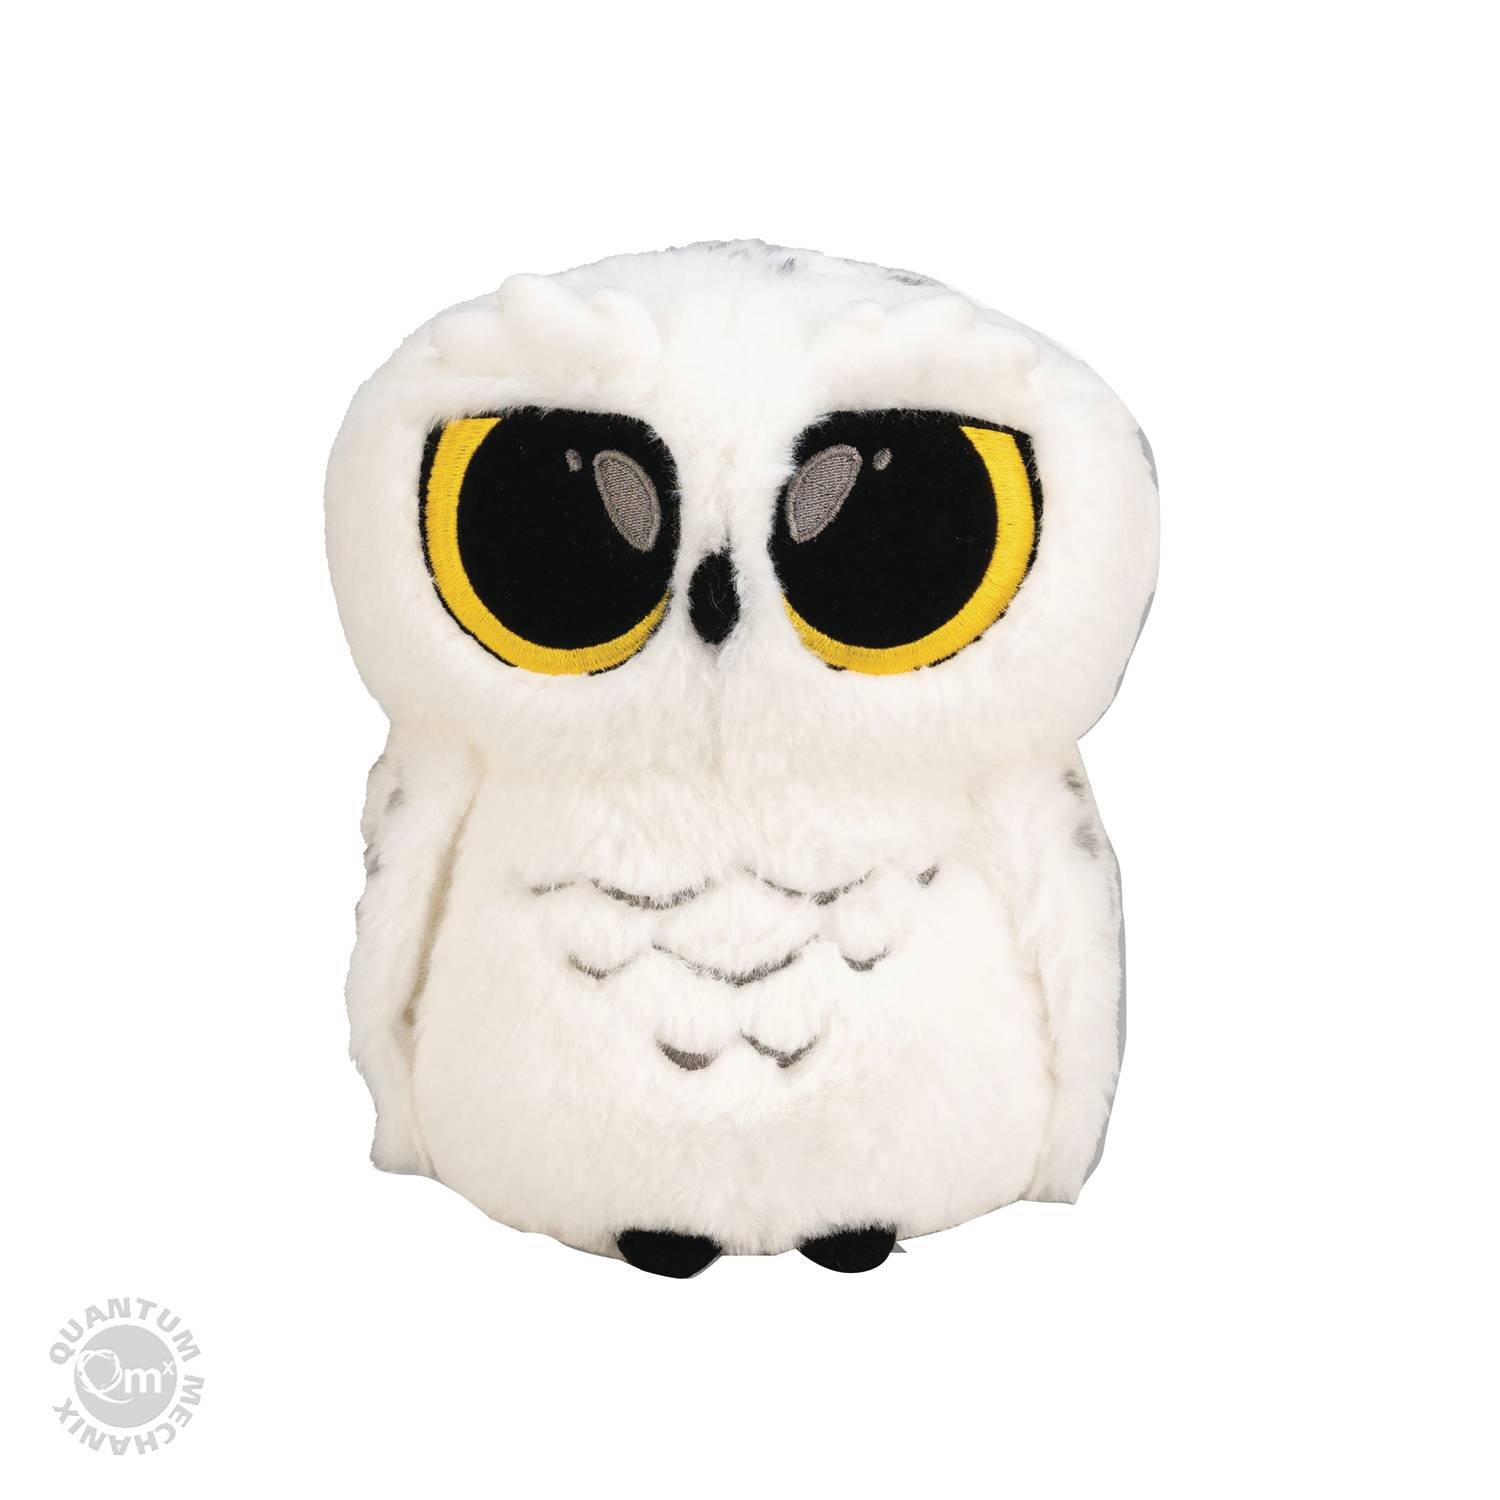 HARRY POTTER HEDWIG QREATURES PLUSH